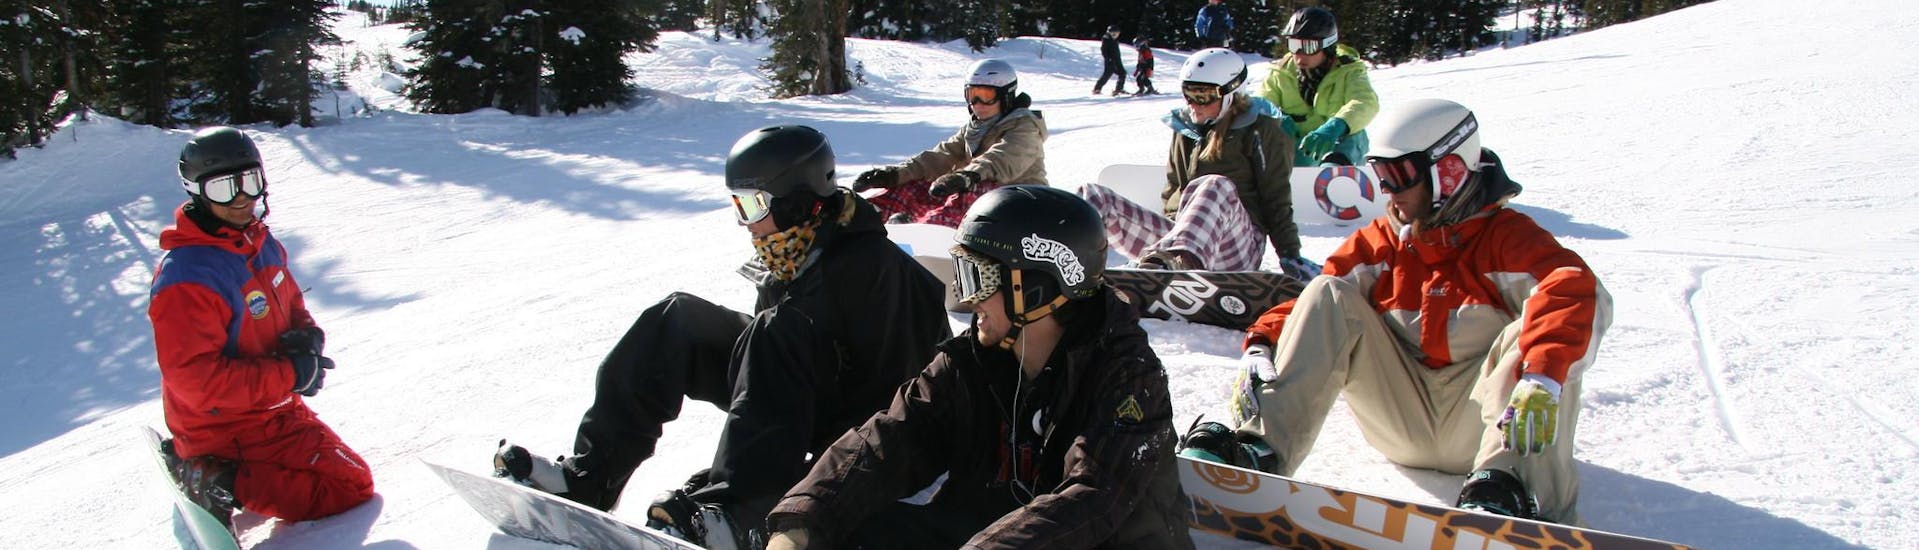 Group of snowboarders having fun together during a snowboard lesson for beginners